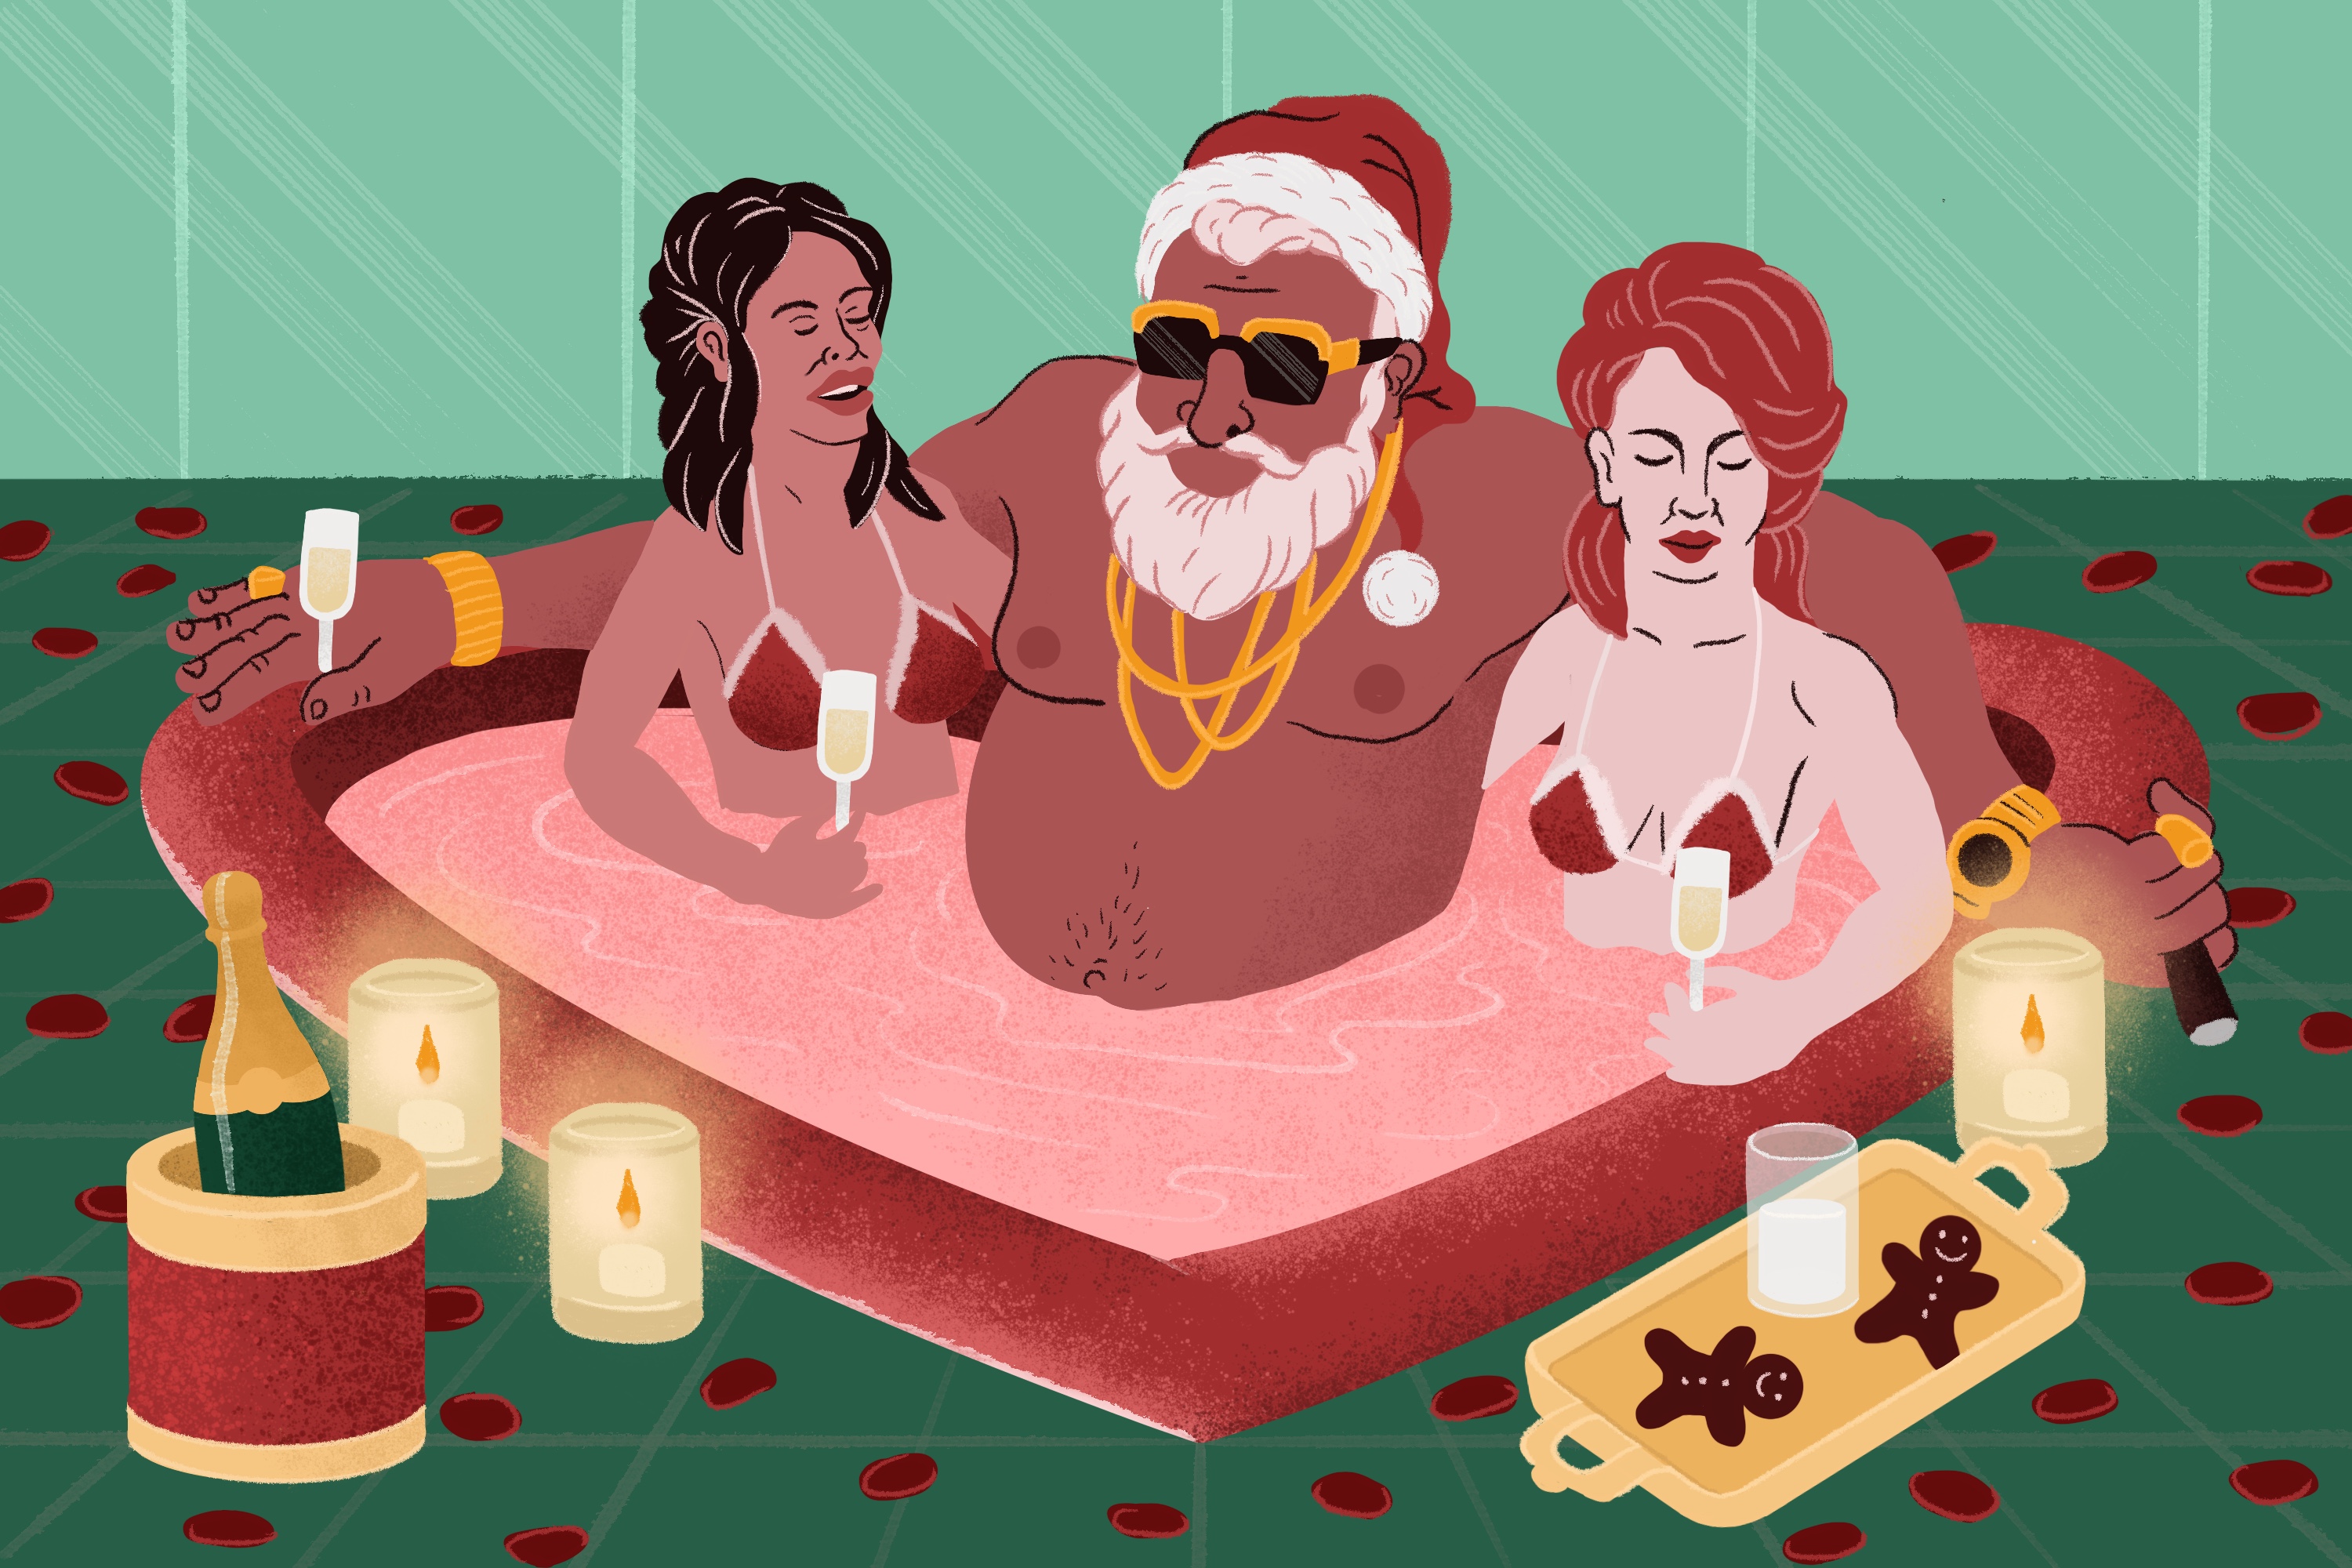 Illustration shows Santa in a heart shaped hot tub with two women on either side sipping champagne